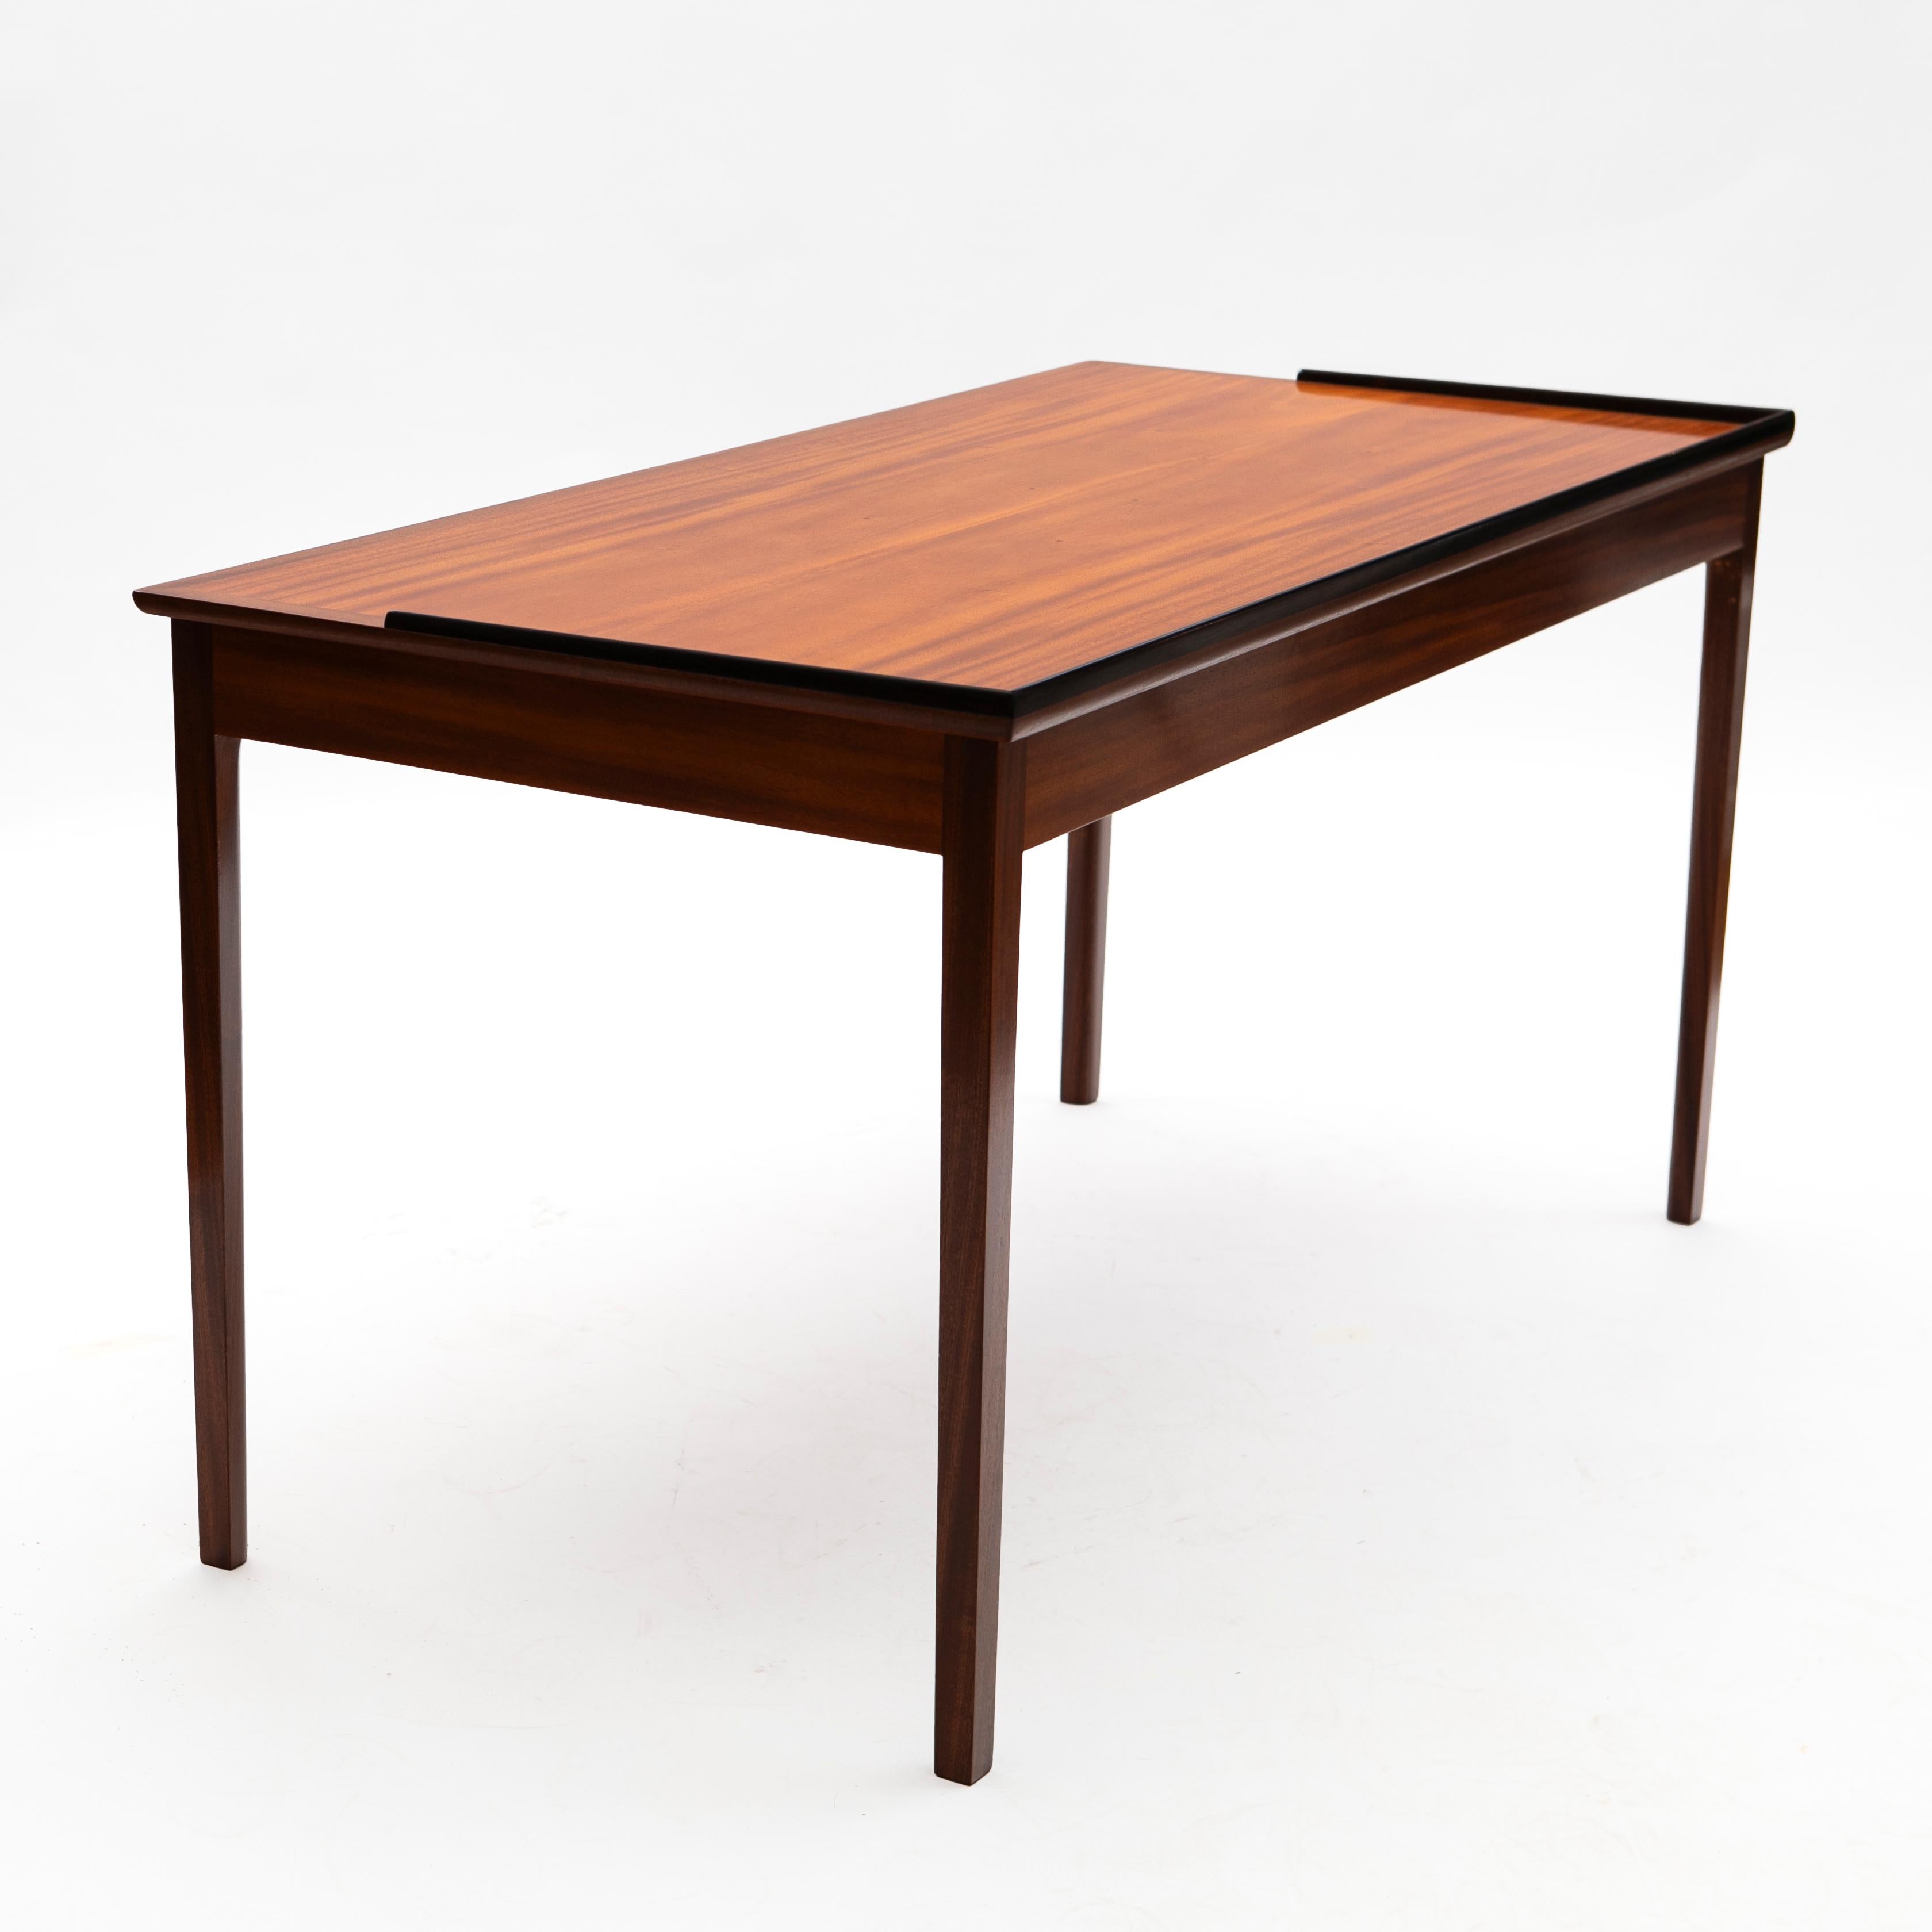 Ole Wanscher (Danish architect-designer) 1903-1985.
Rare Ole Wanscher desk in mahogany executed by A. J. Iversen, Copenhagen, Denmark, 1940-1950.
Features three drawers (one large and two smaller drawers) with rosewood drawer handles. Good legroom